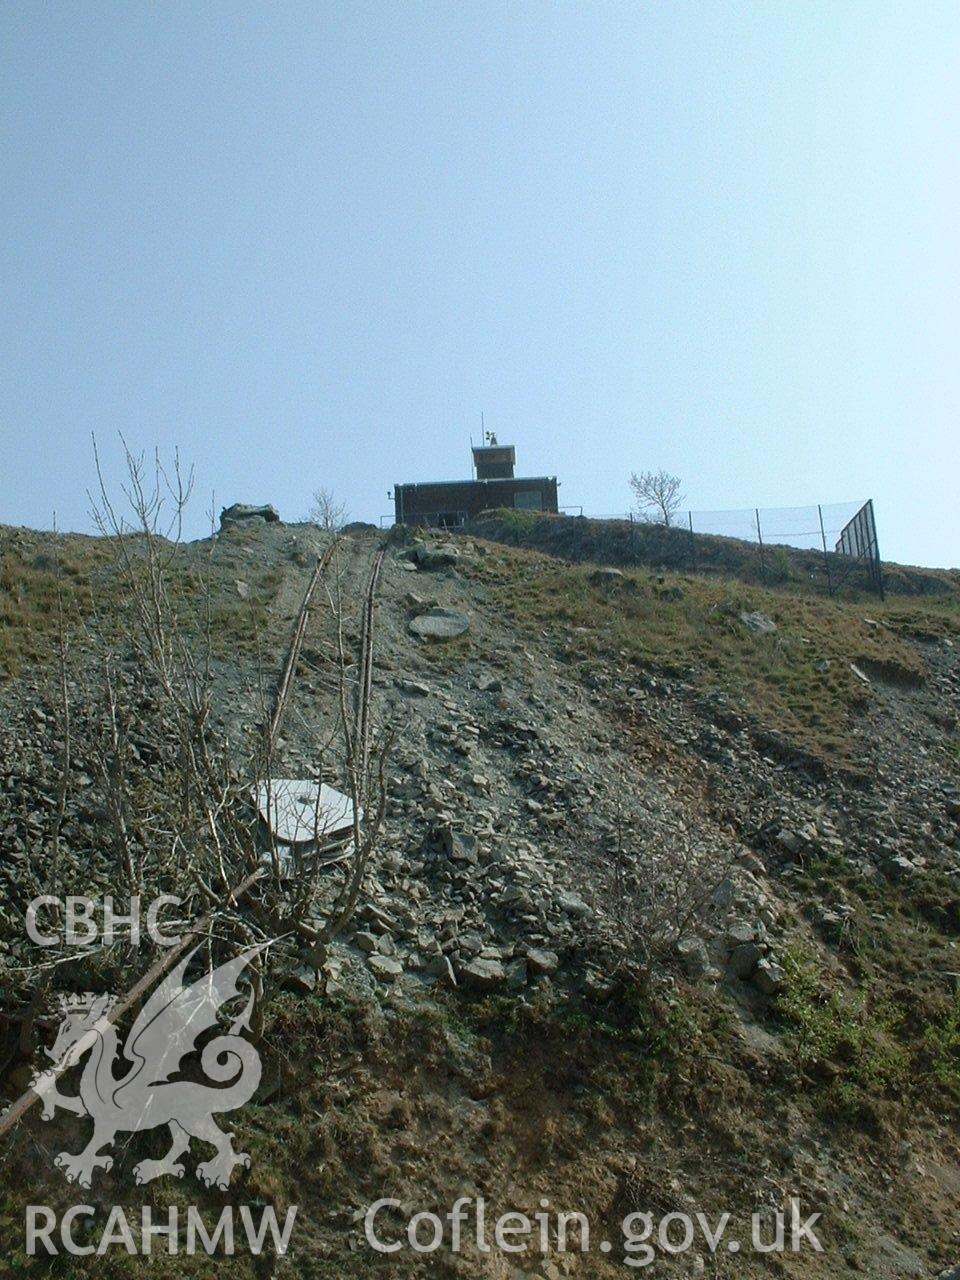 Colour digital photograph showing a winch house and pulley block.